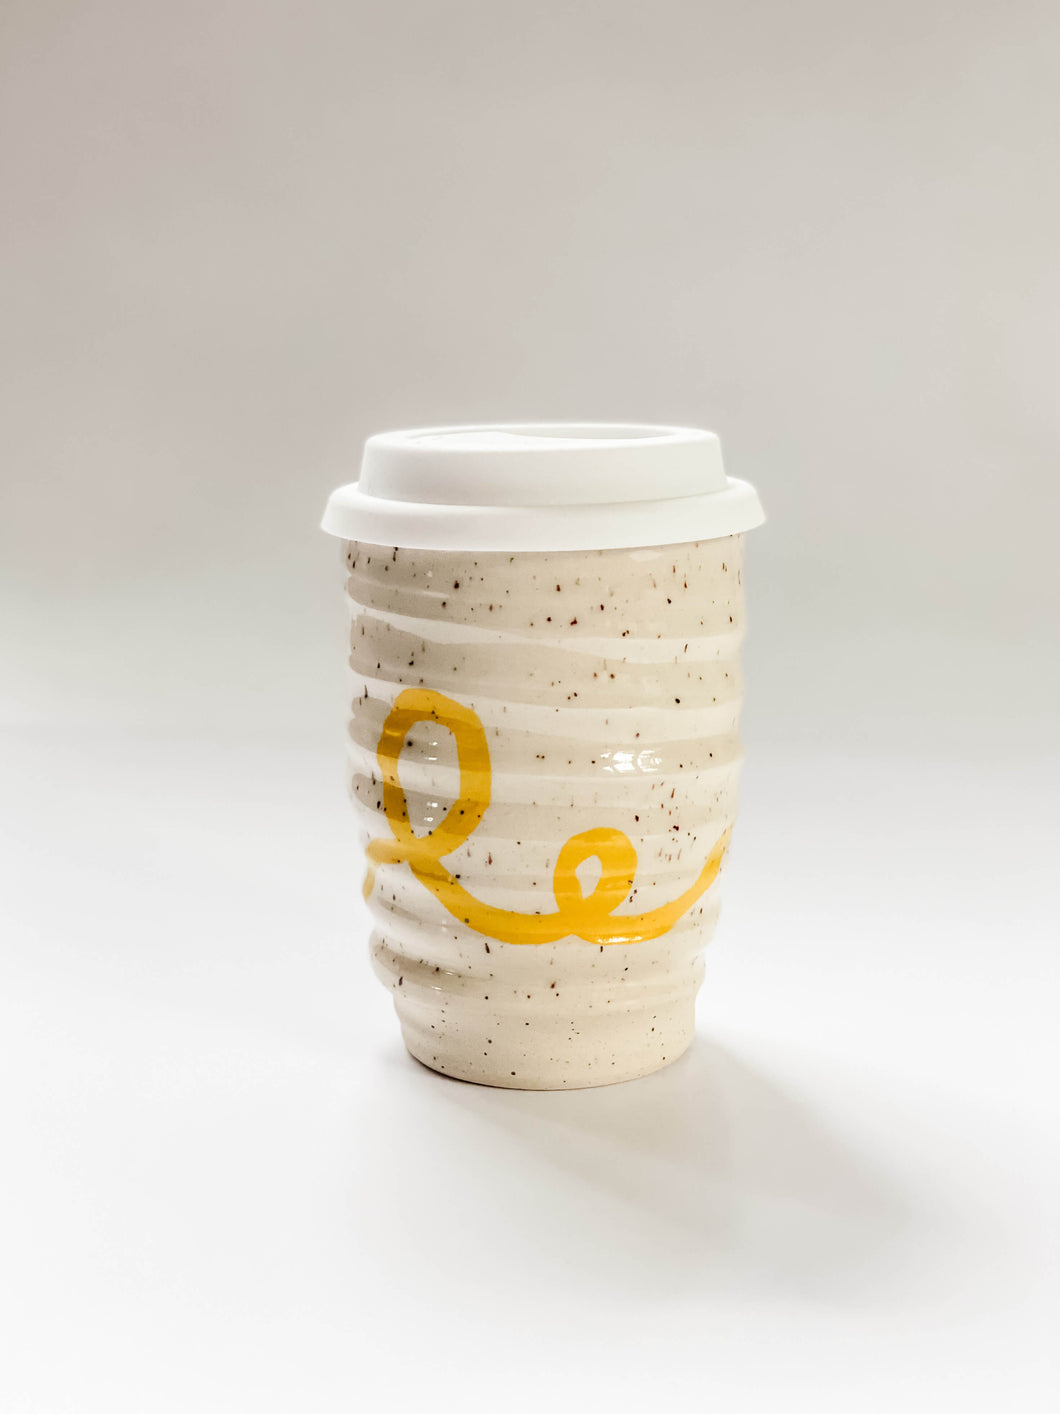 Wheel thrown travel mugs in cream and brown speckled clay with hand painted yellow curving line design 